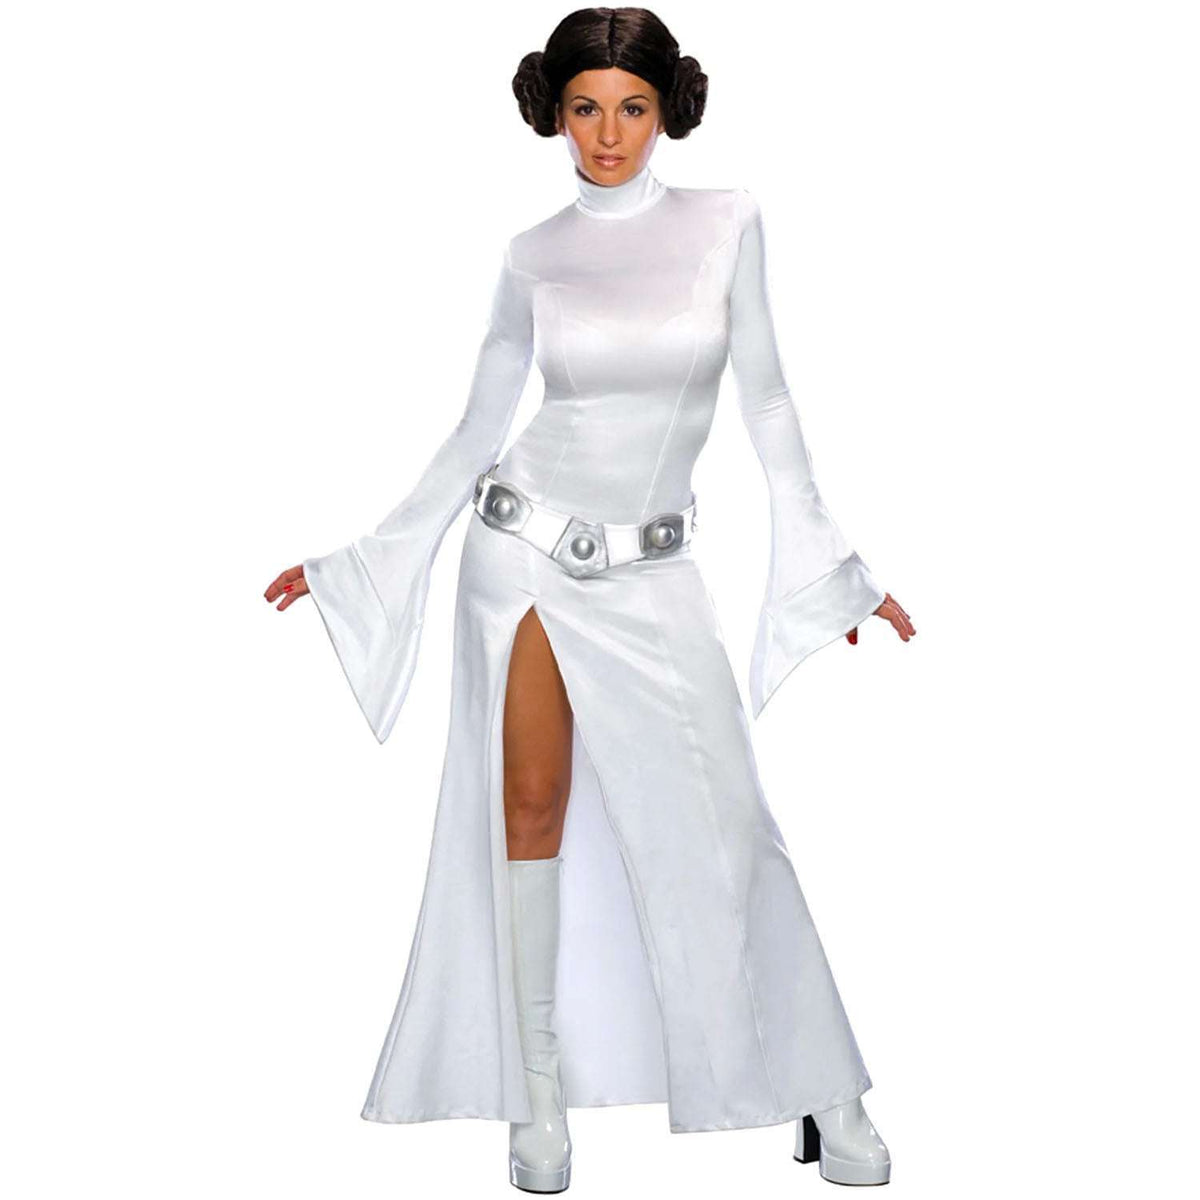 Star Wars Deluxe Princess Leia Adult Costume w/ Wig